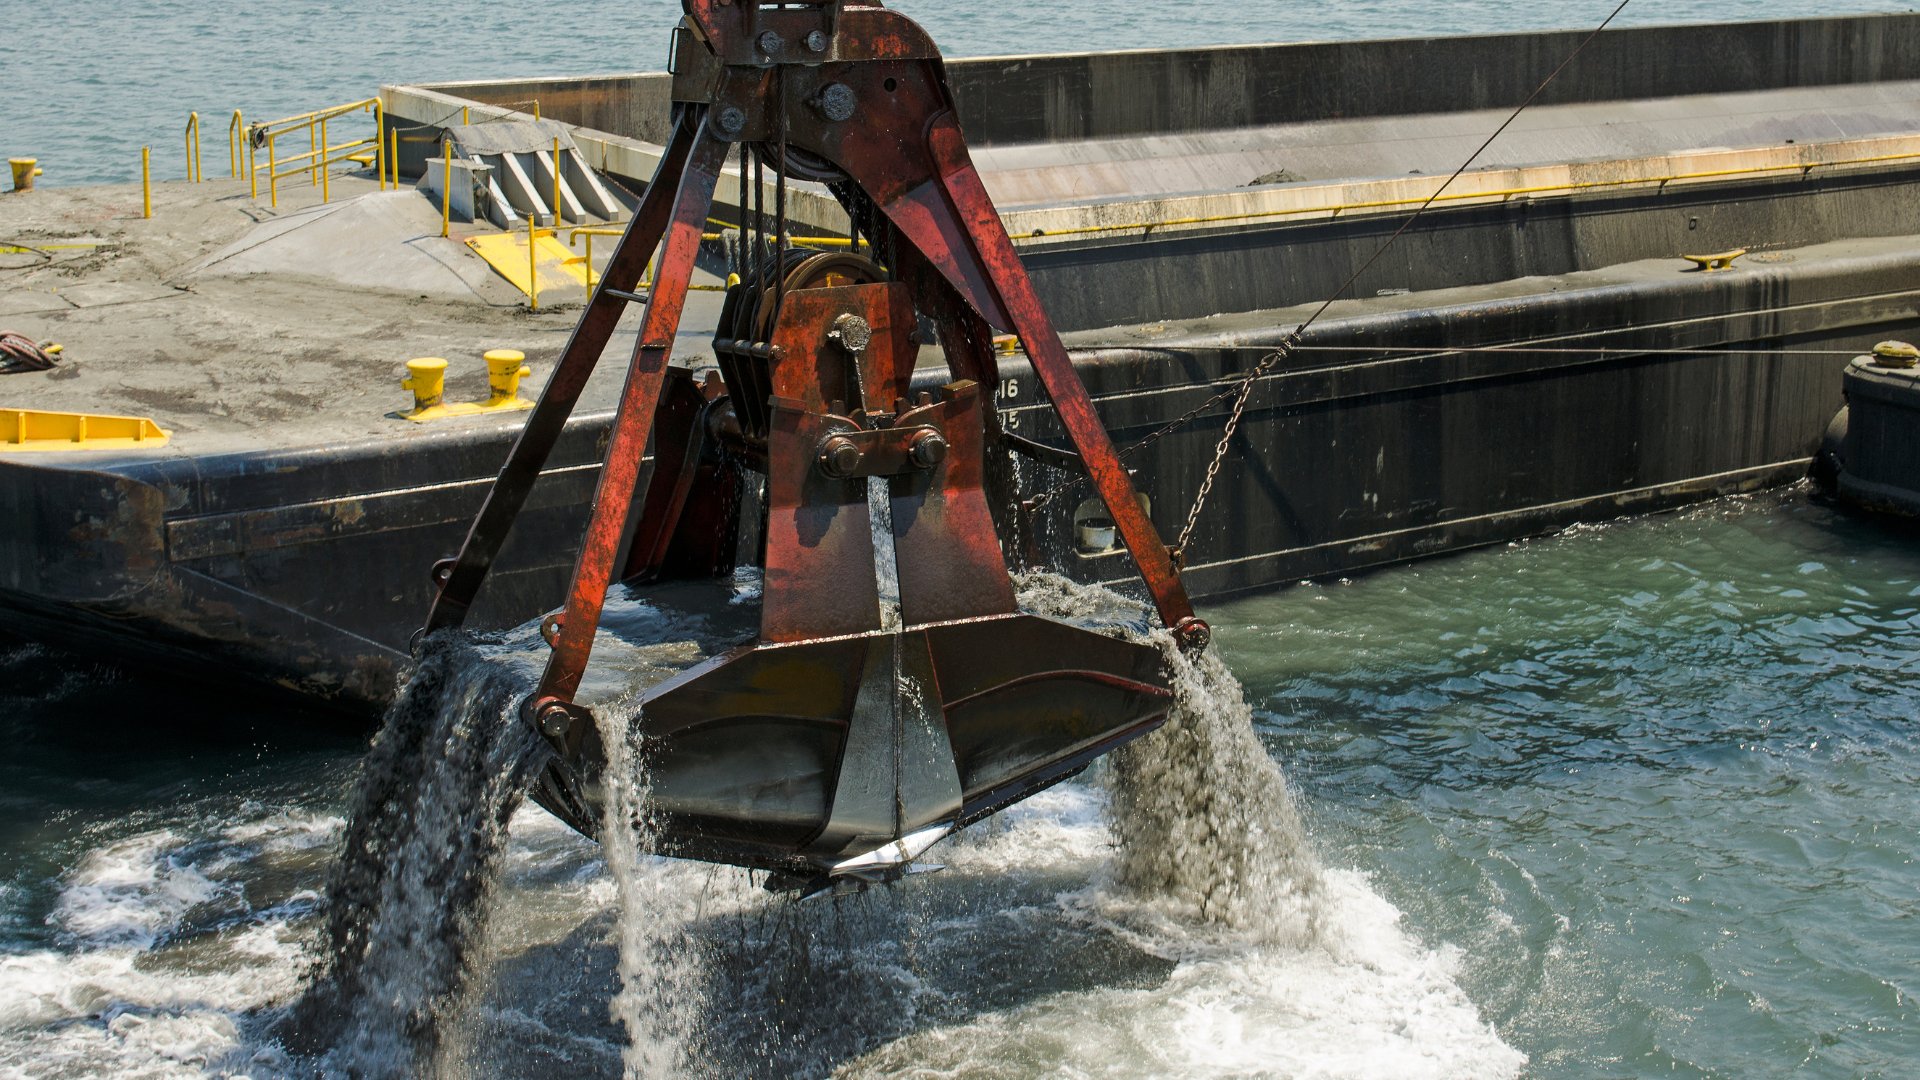 Dredging &amp;amp;amp;mdash; the removal of sediment from water &amp;amp;amp;mdash; allows ships to travel safely and efficiently. Dredged material that is considered nonhazardous can be reused to restore habitats, protect shores and structures, and nourish beaches, among other uses.